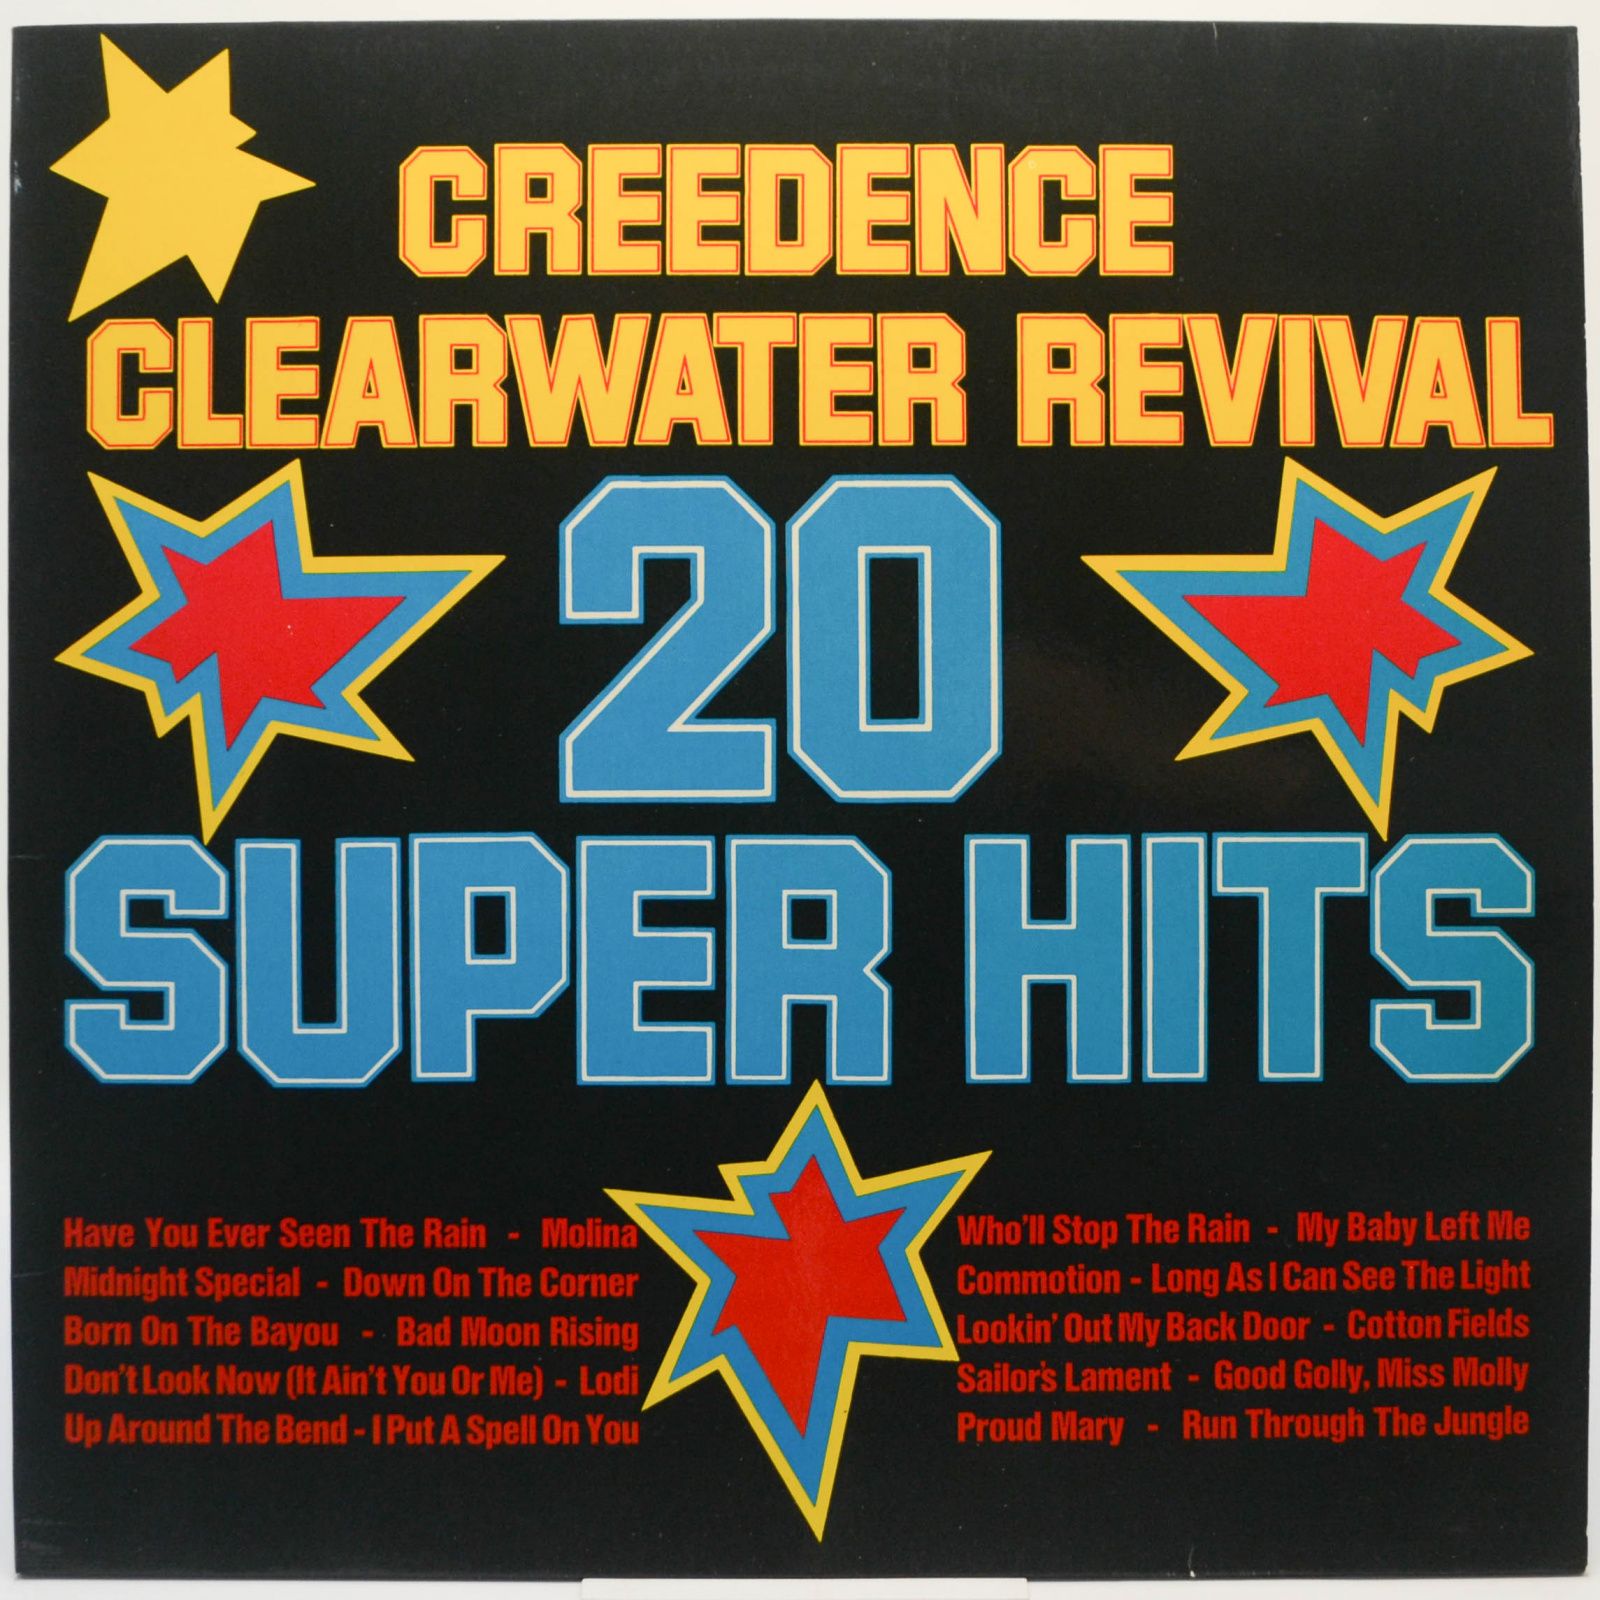 Creedence Clearwater Revival — 20 Super Hits, 1972